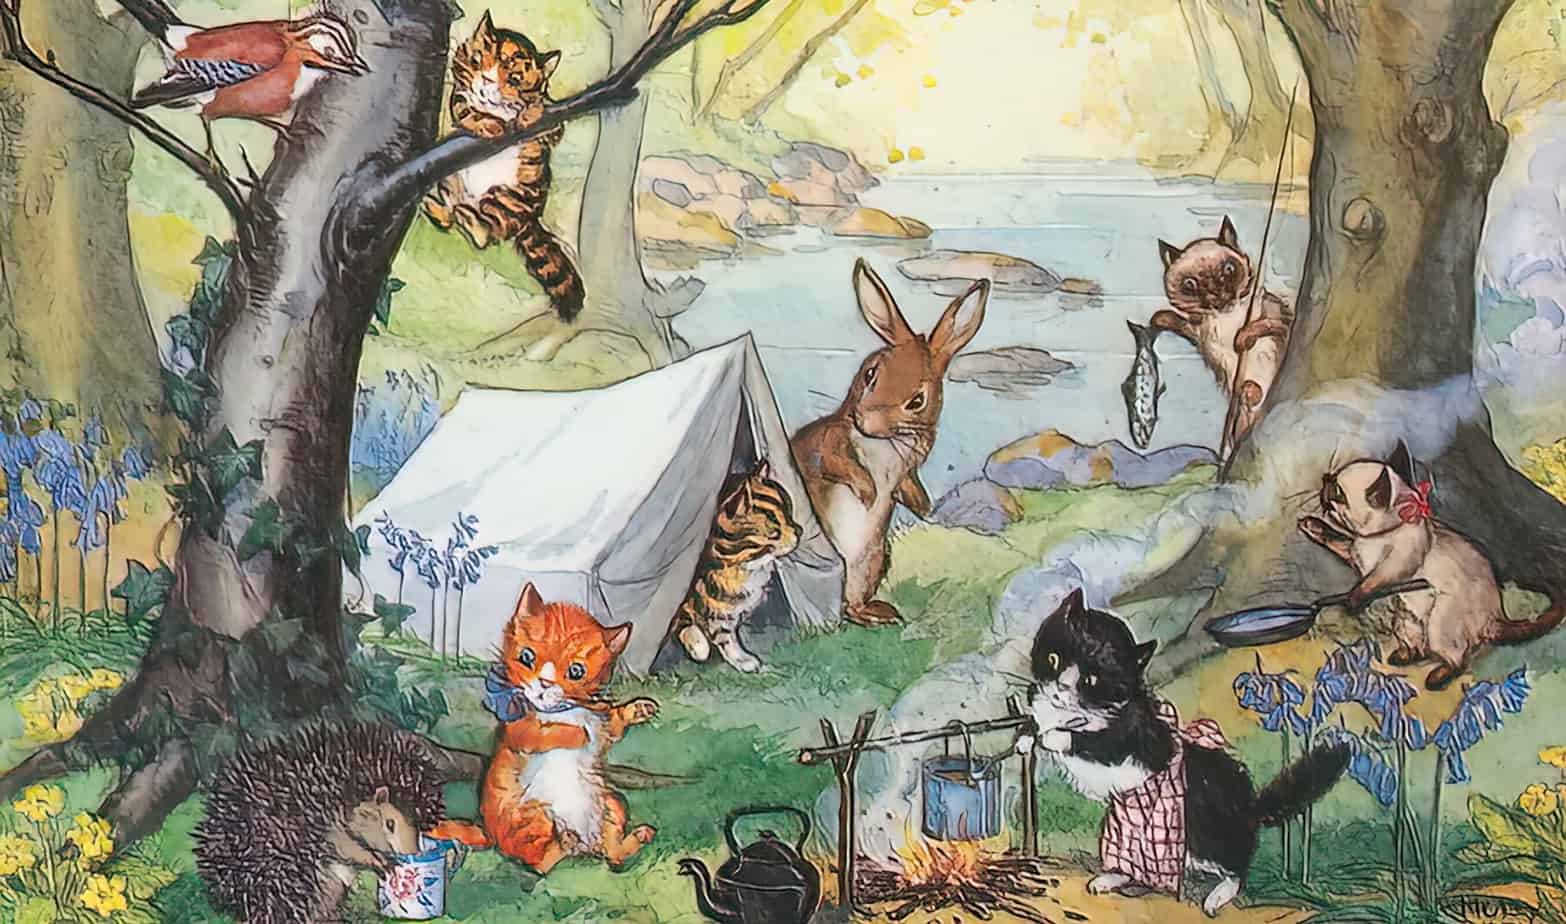 Molly Brett Postcard of cats camping and being visited by a hedgehog, rabbit, and bird